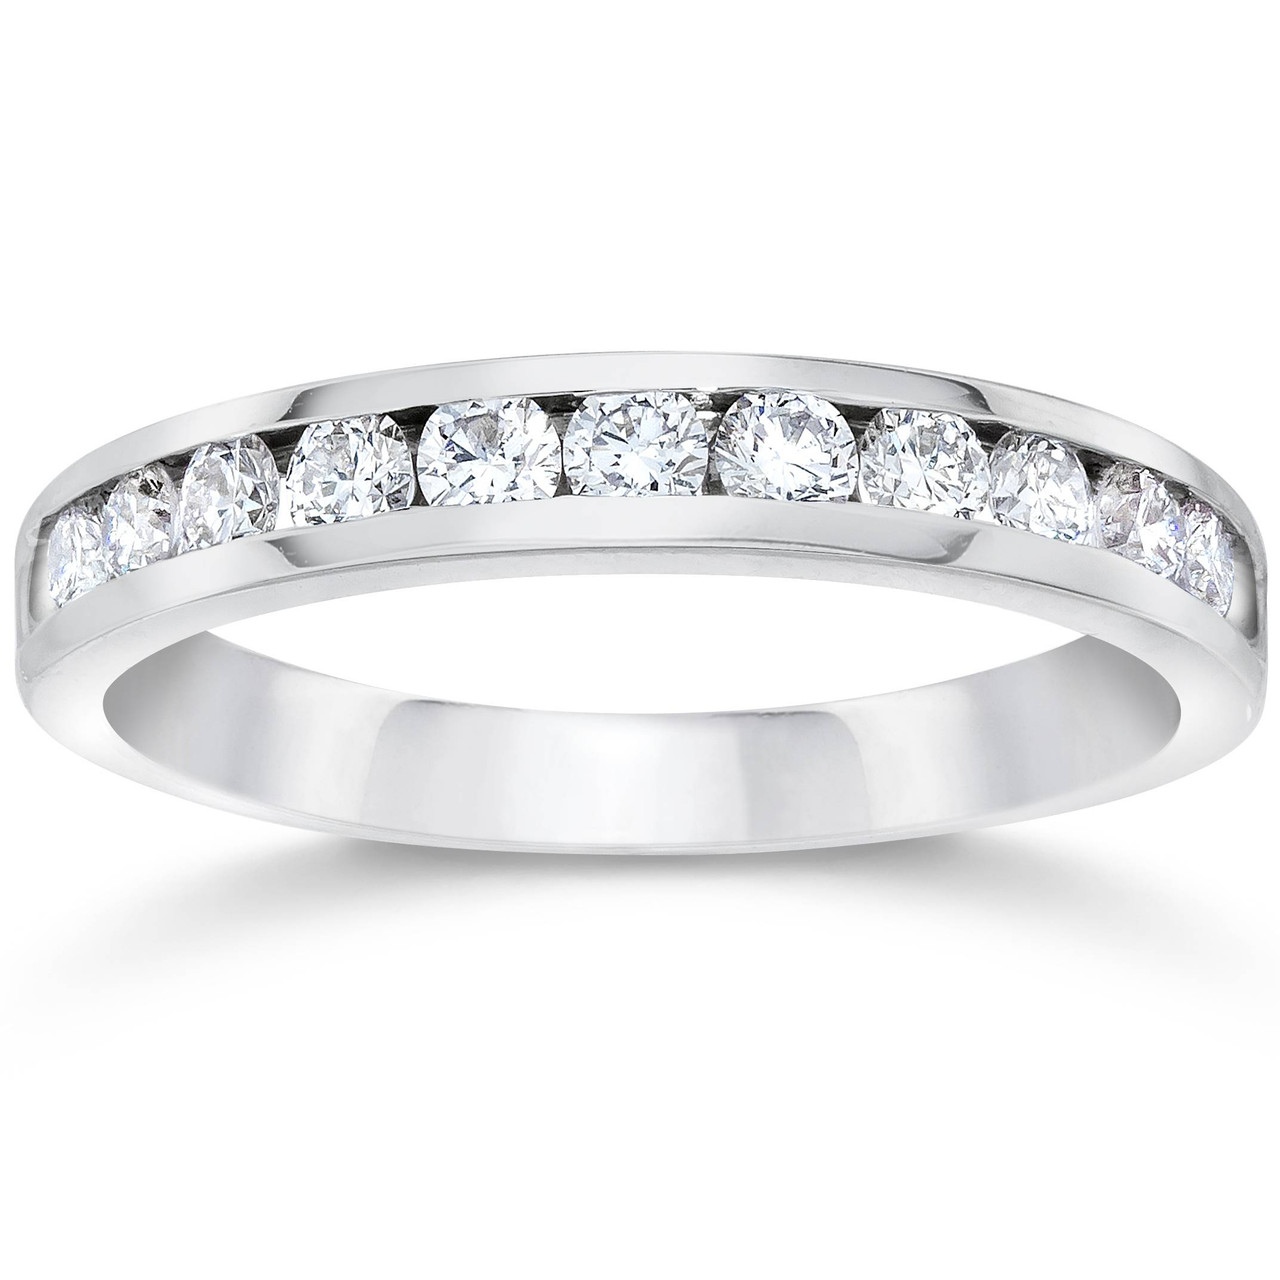 14K White Gold Woman's Engagement Ring with Channel Set